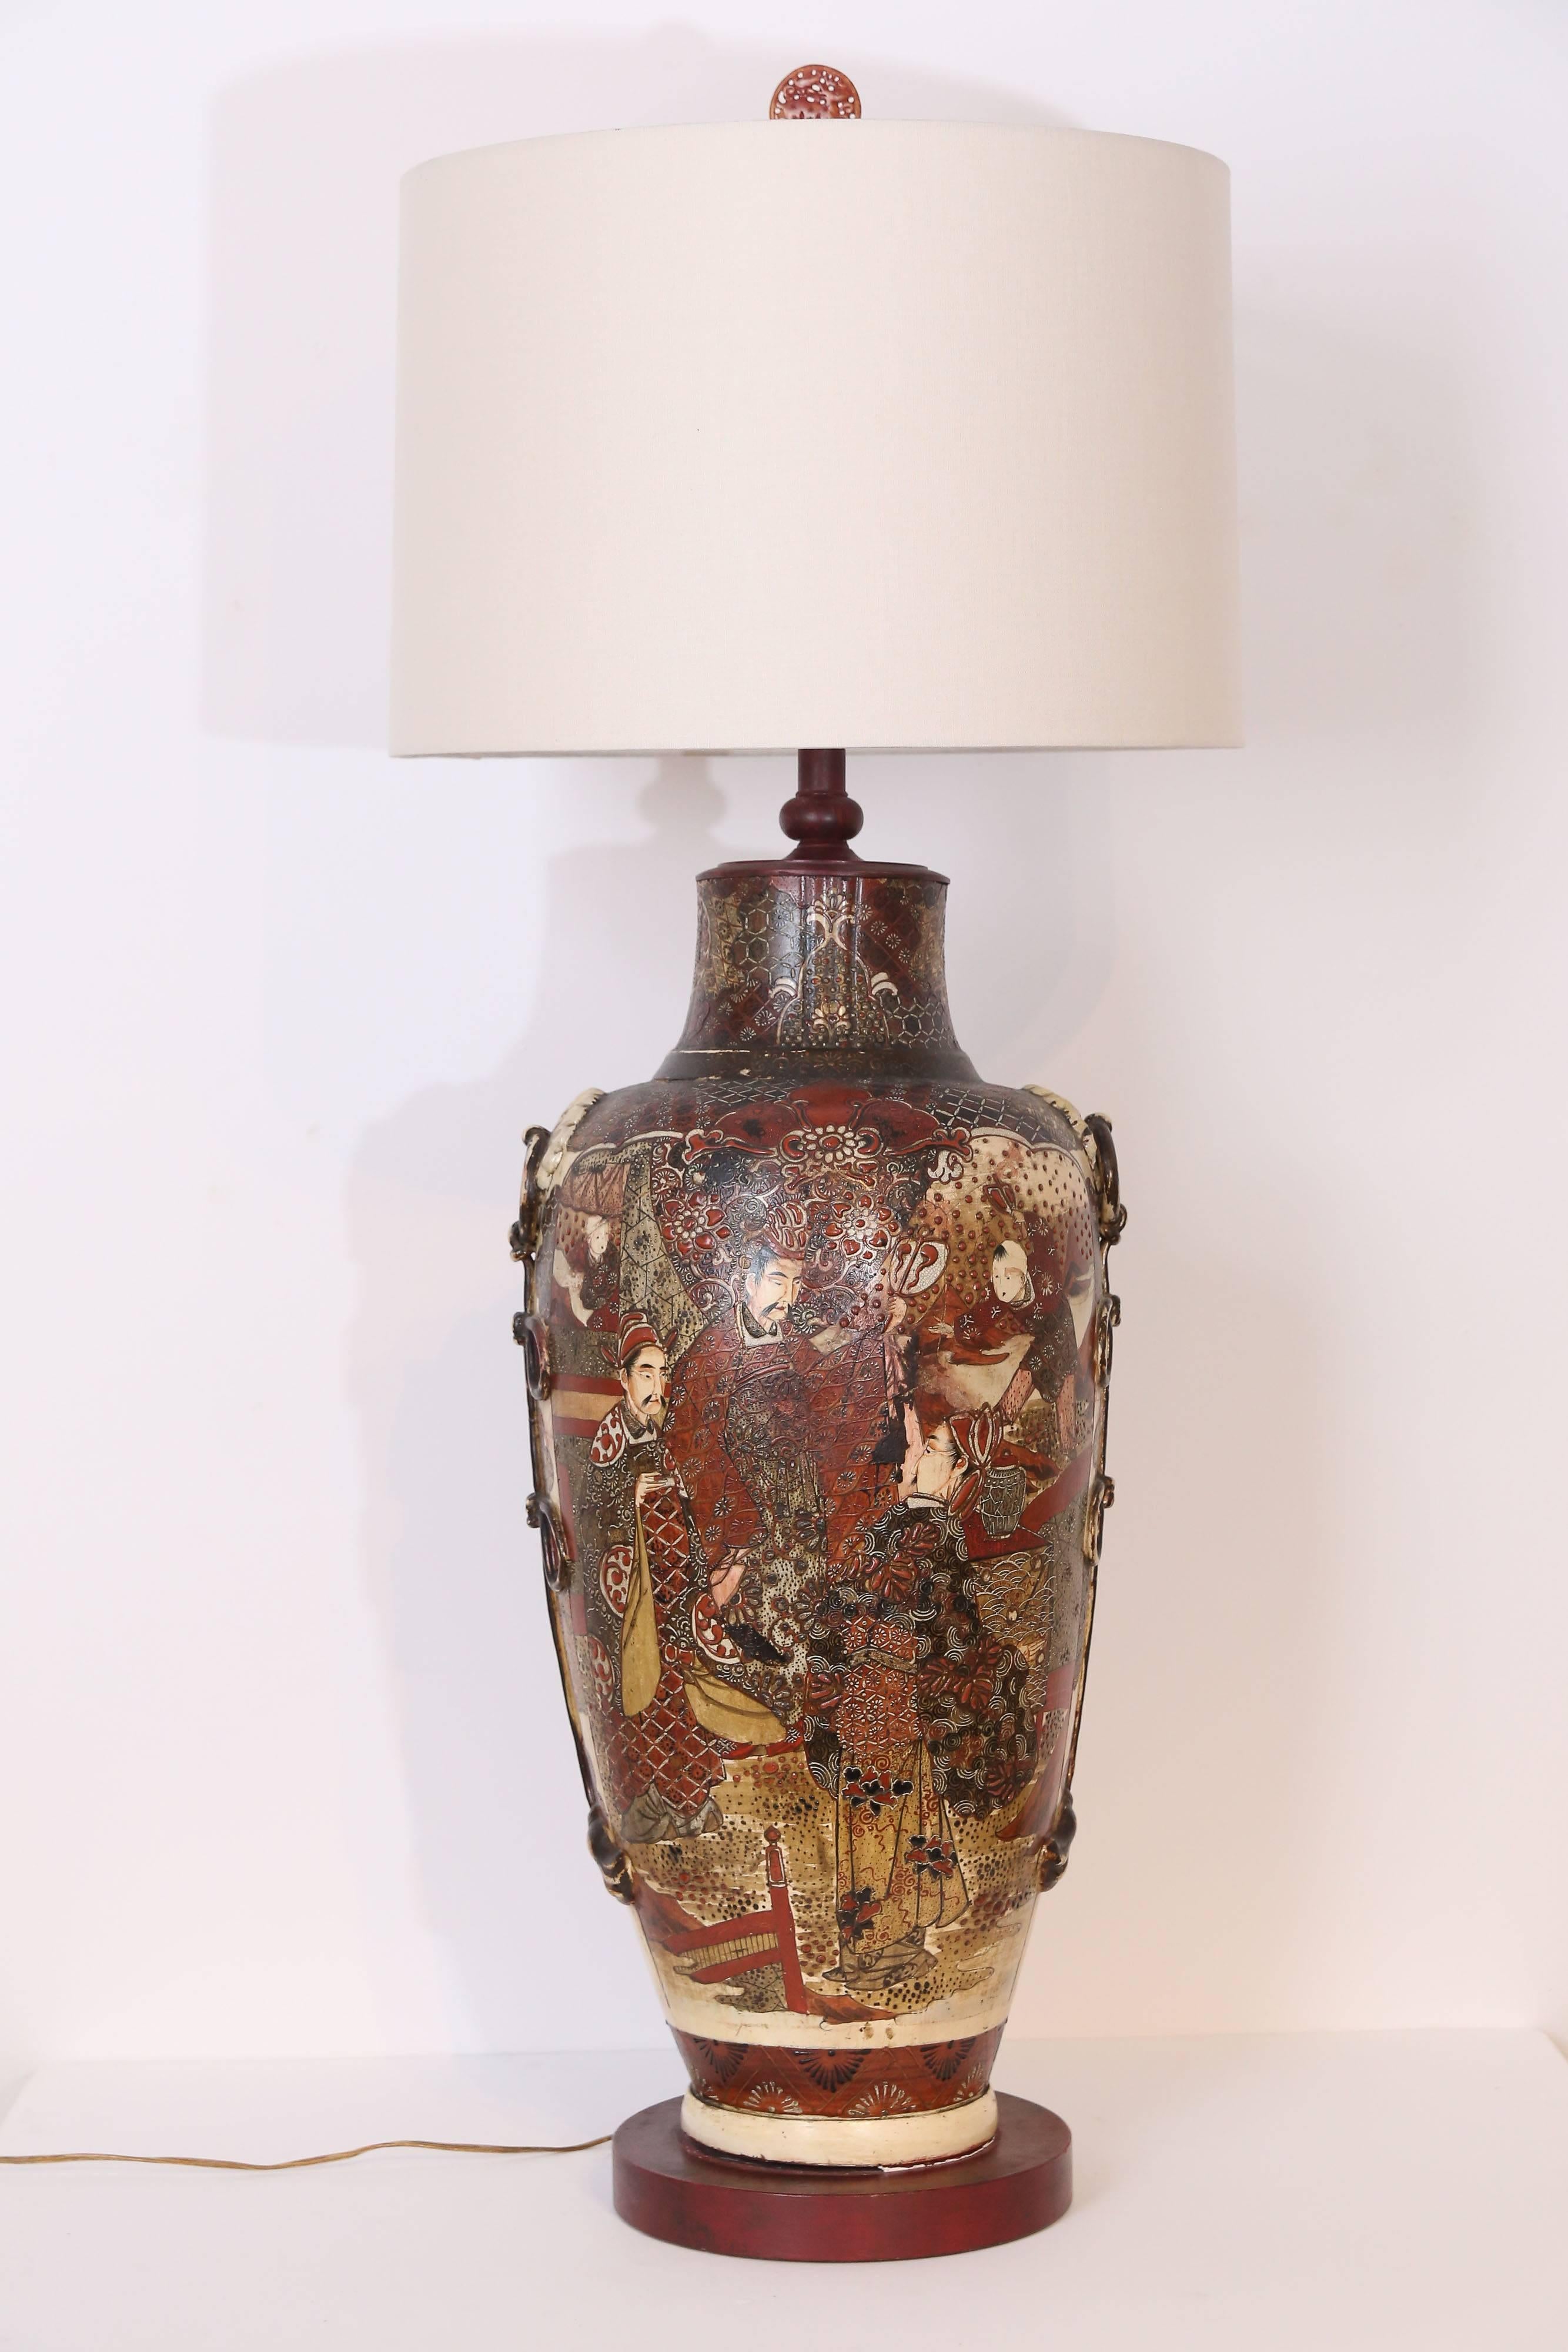 Beautiful glazed porcelain lamp in rusts, creams, whites and burgundies. Carved apricot jade finial of a running deer.